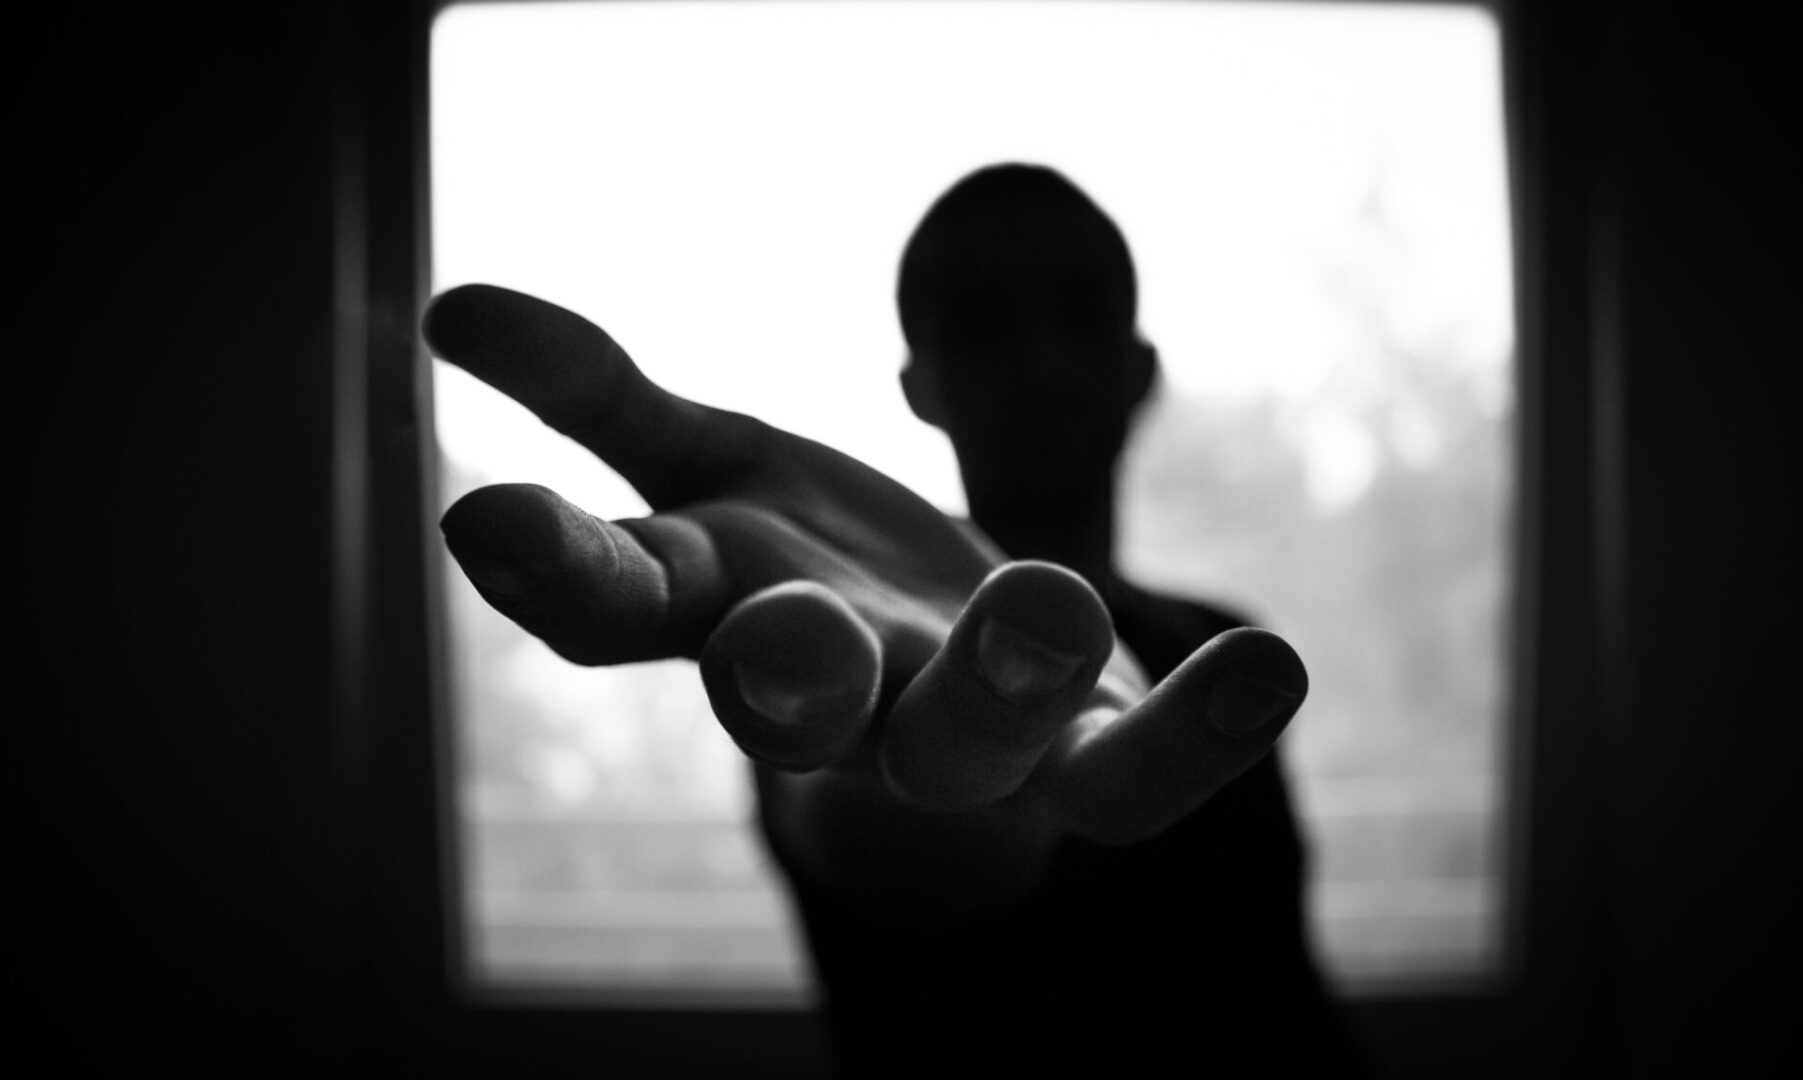 A person holding their hand out in front of a window.